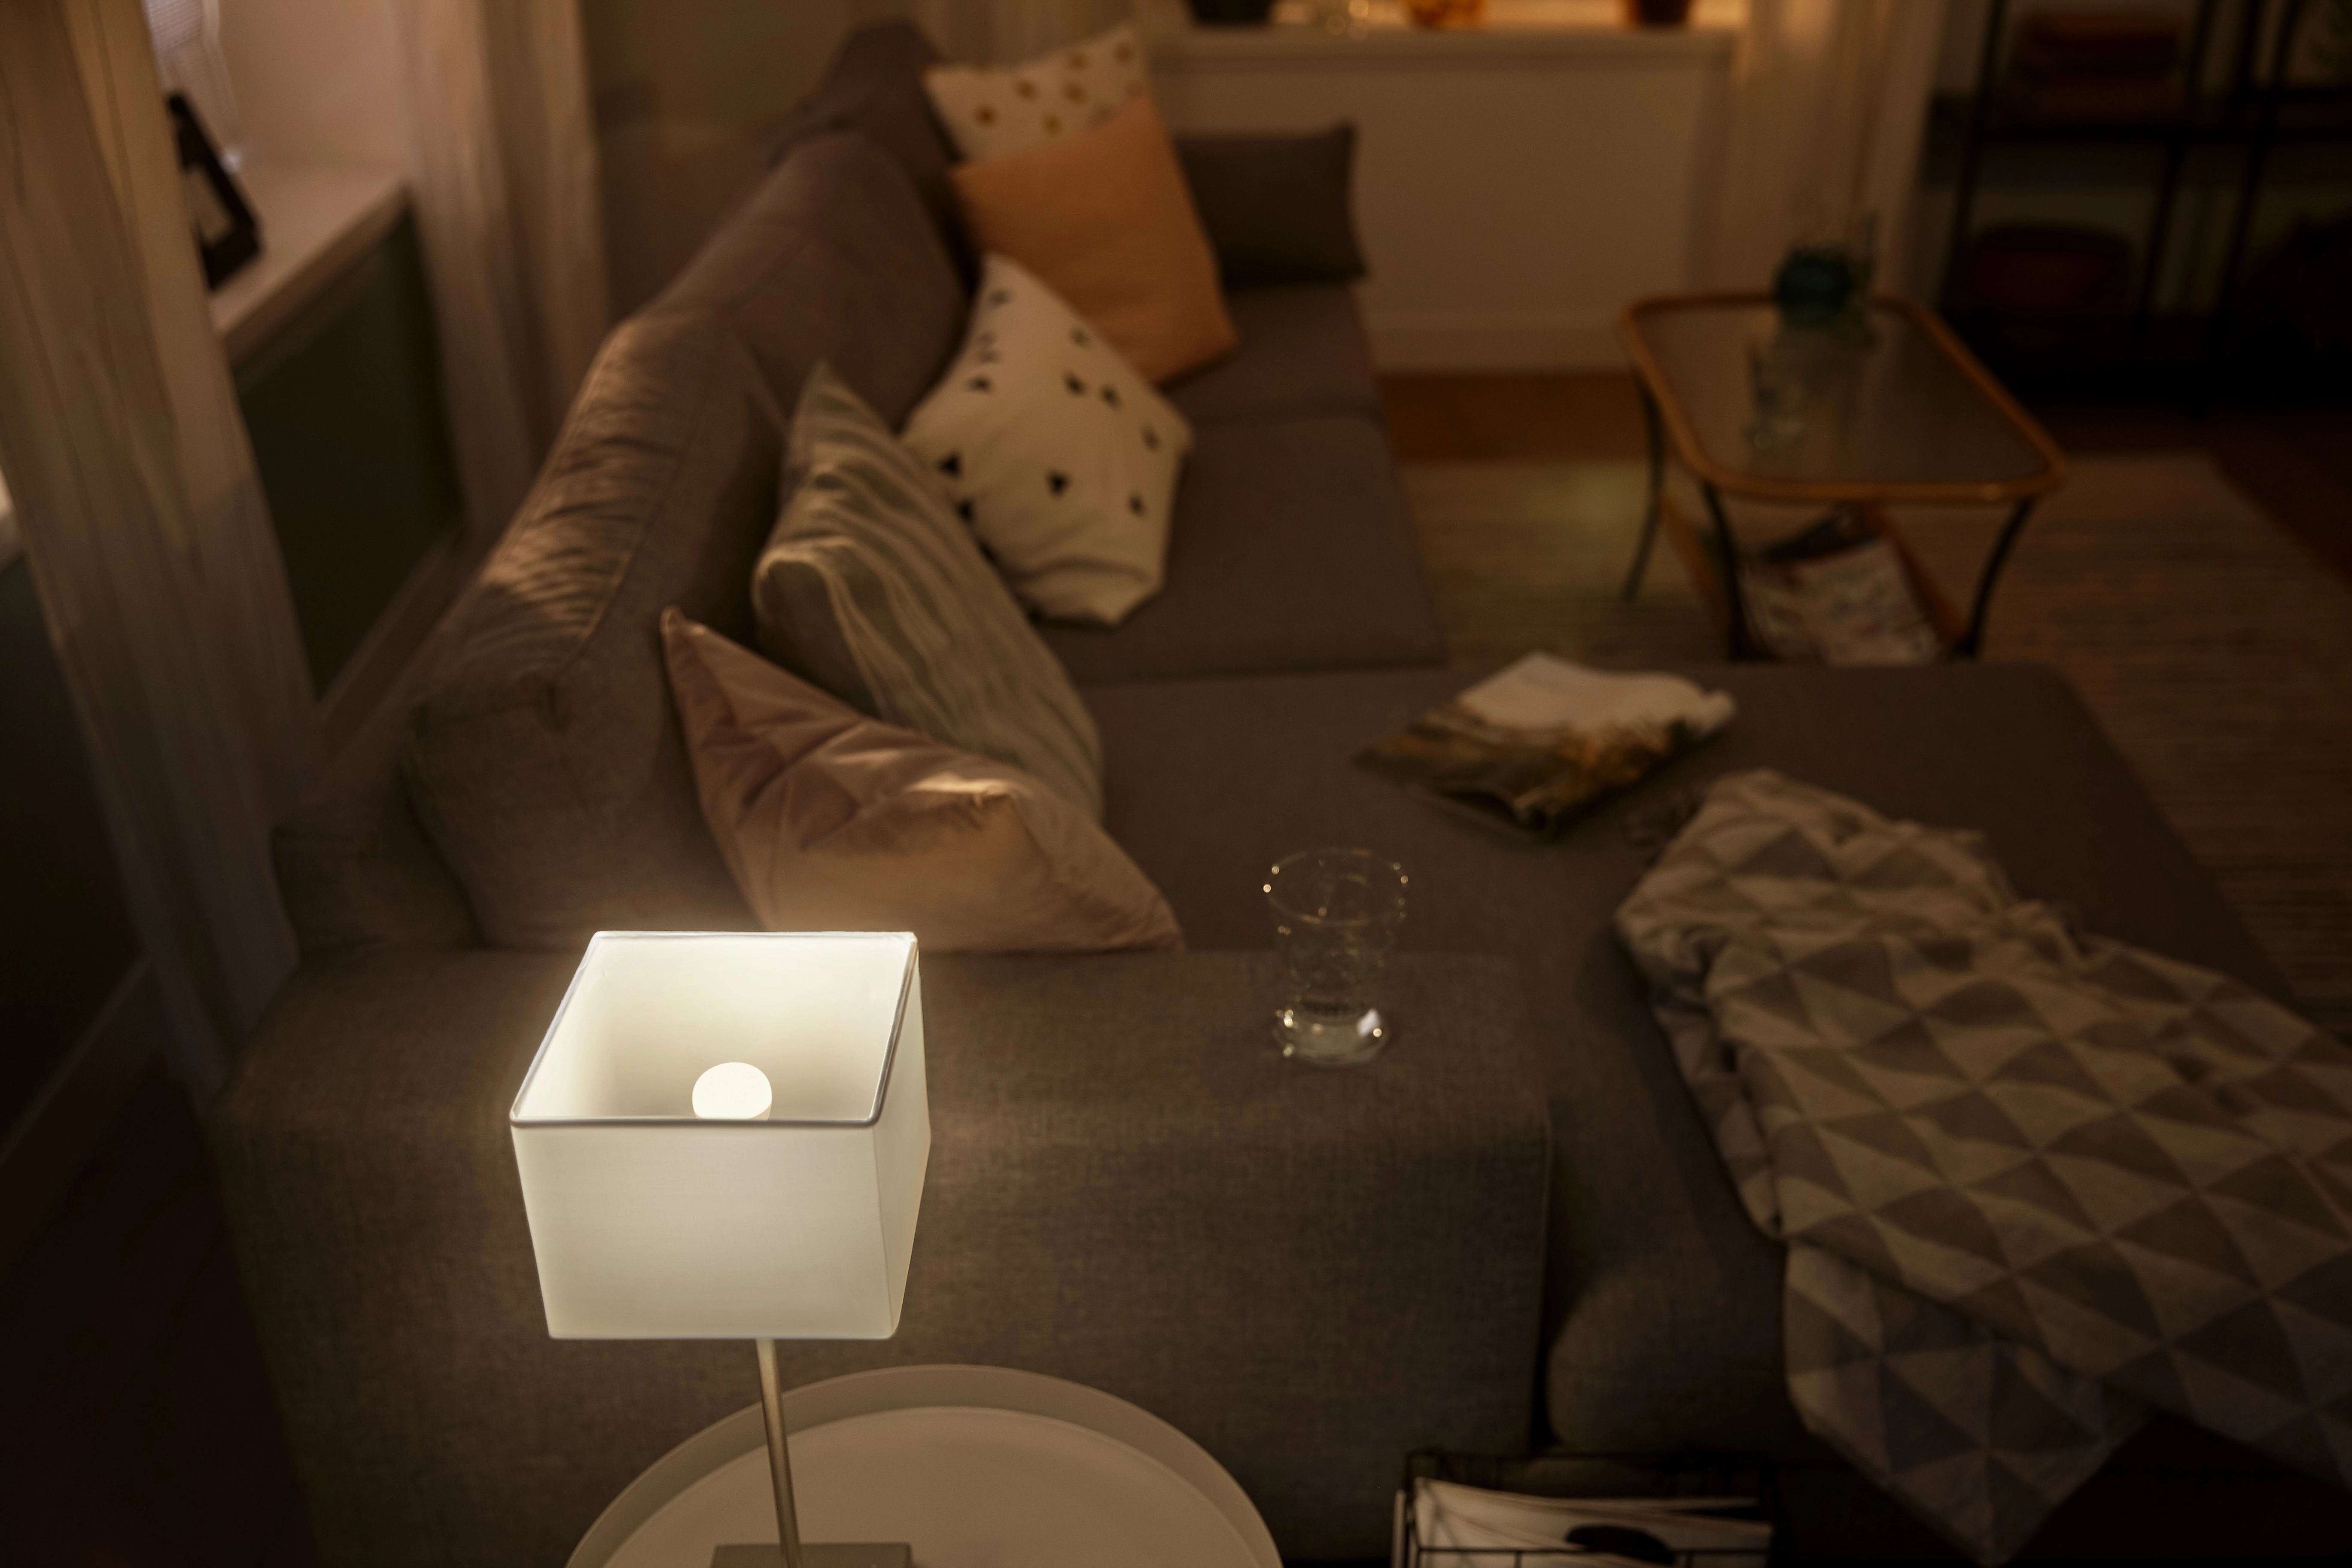 Philips Hue E14 Luster: First impressions of the White Ambiance model 